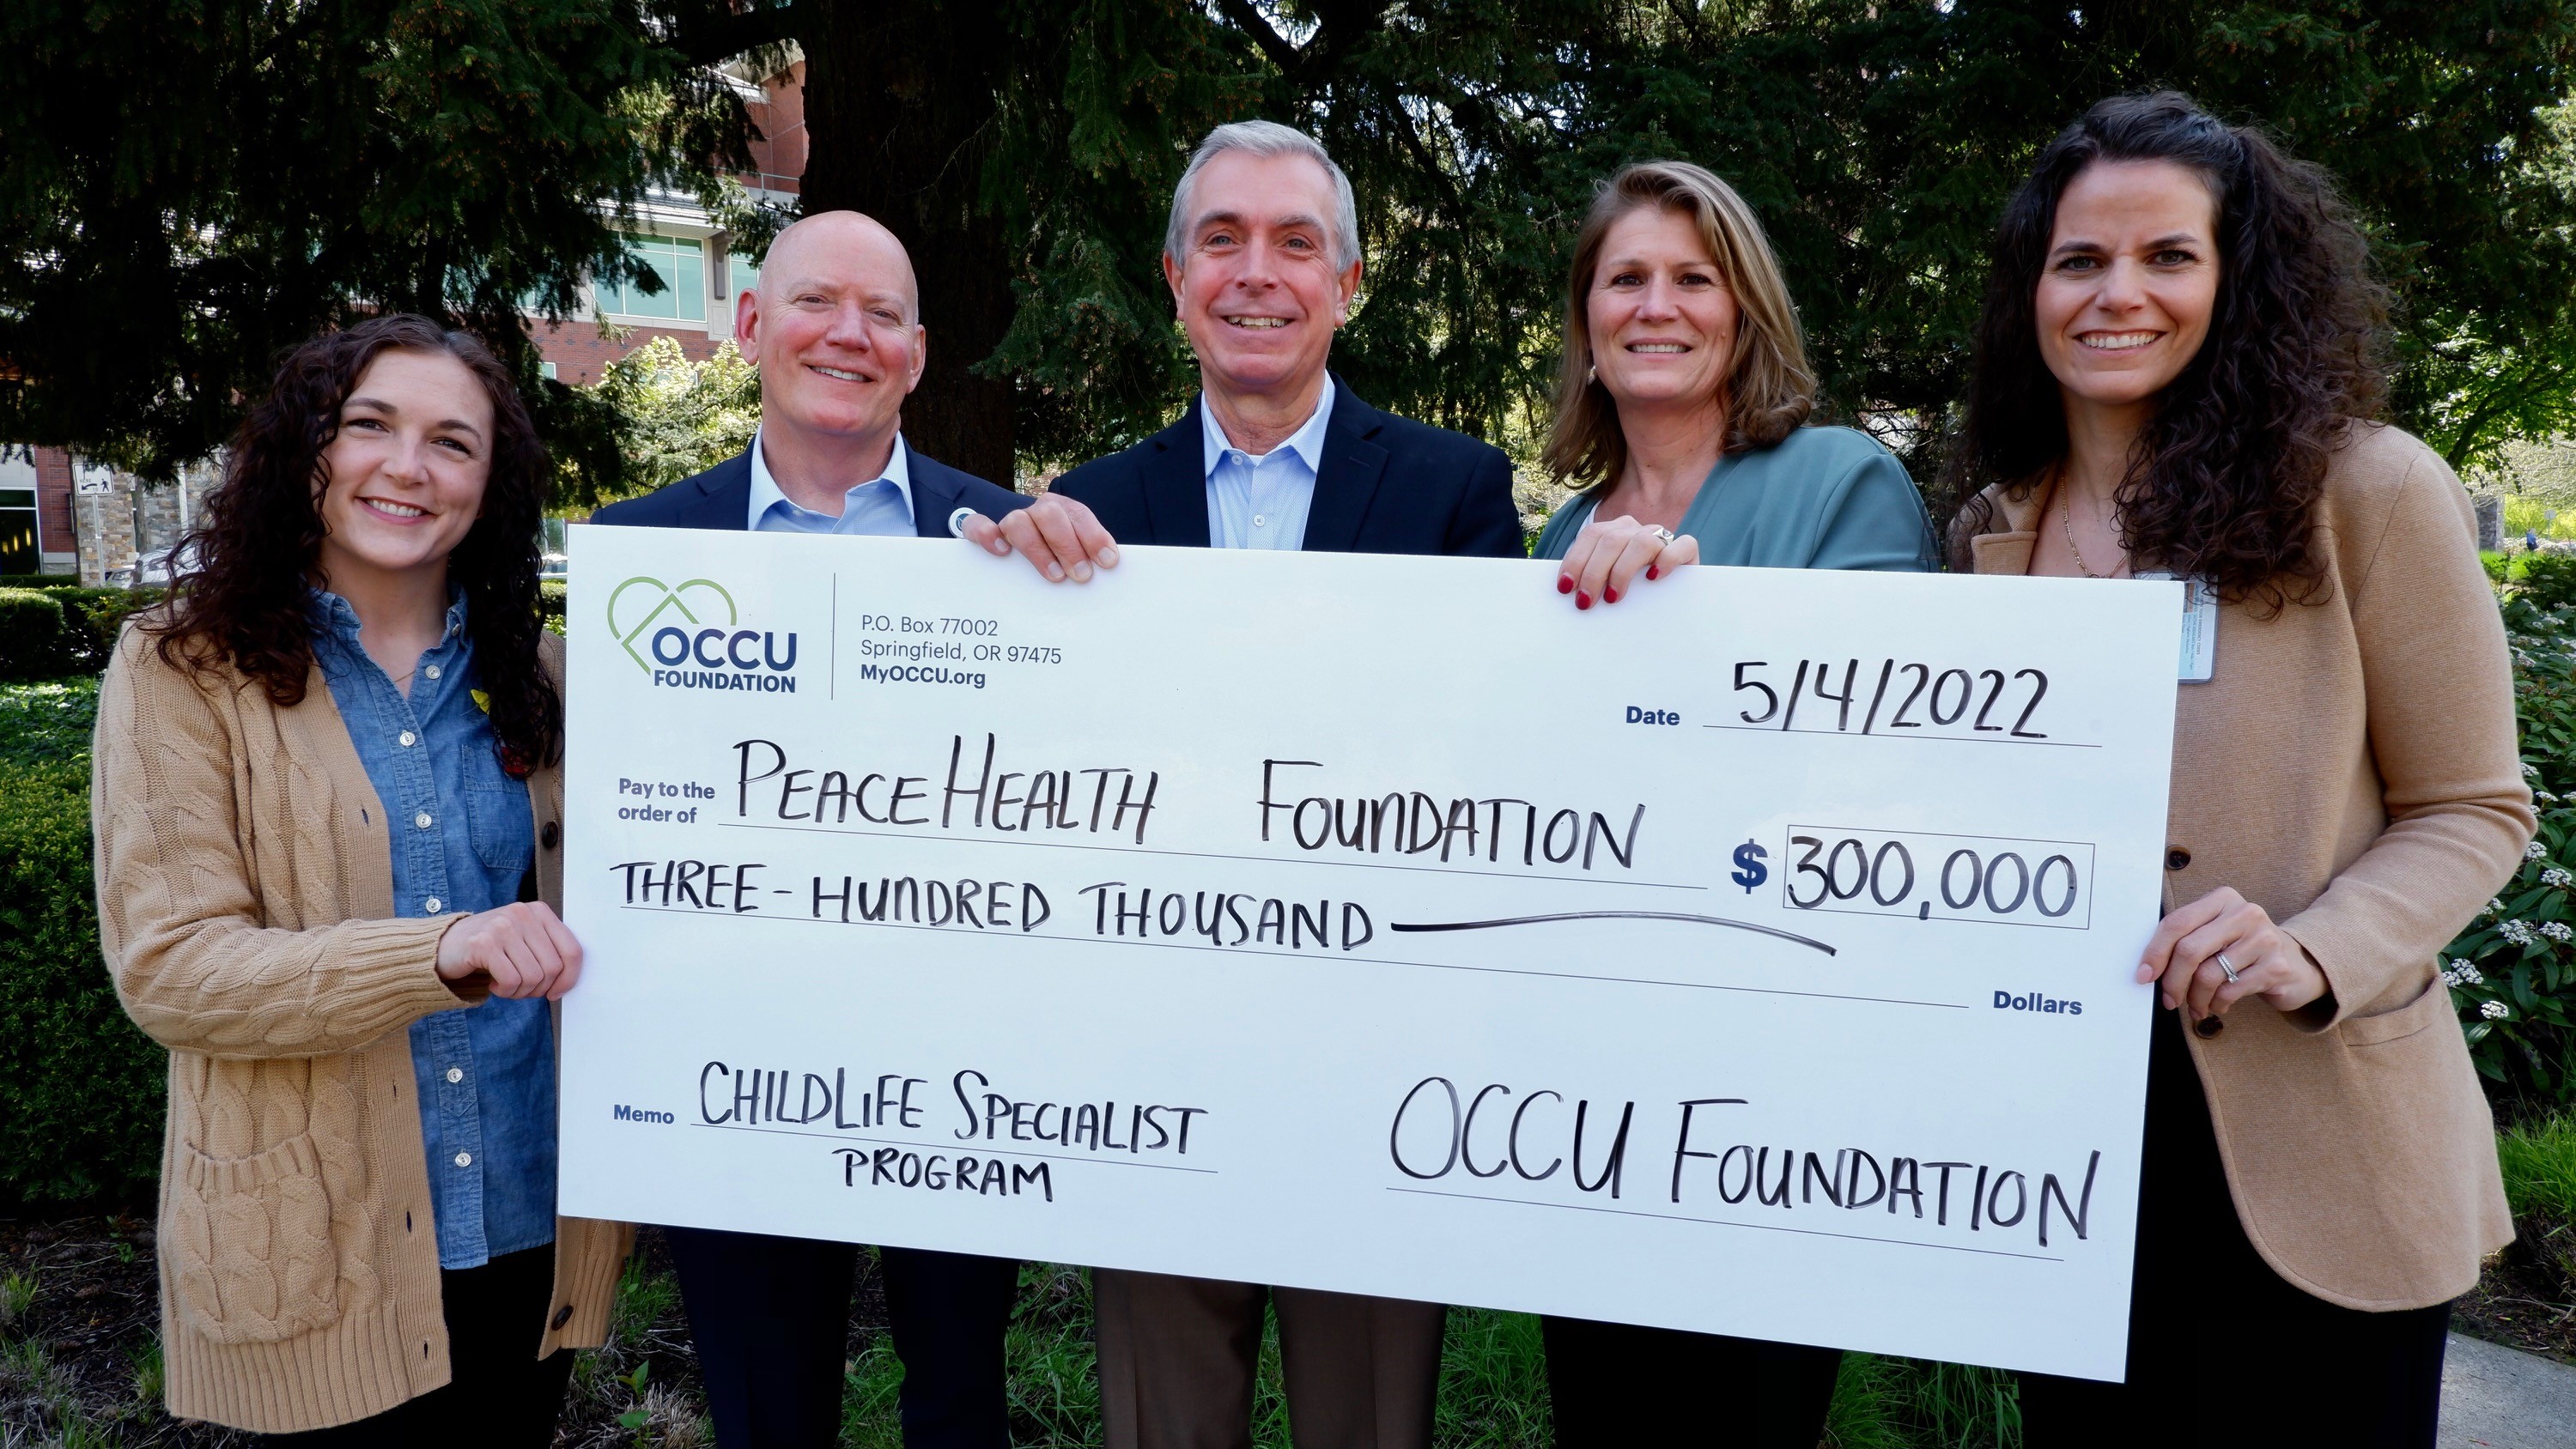 The OCCU Foundation presents PeaceHealth with a large check for the Childlife Specialist Program